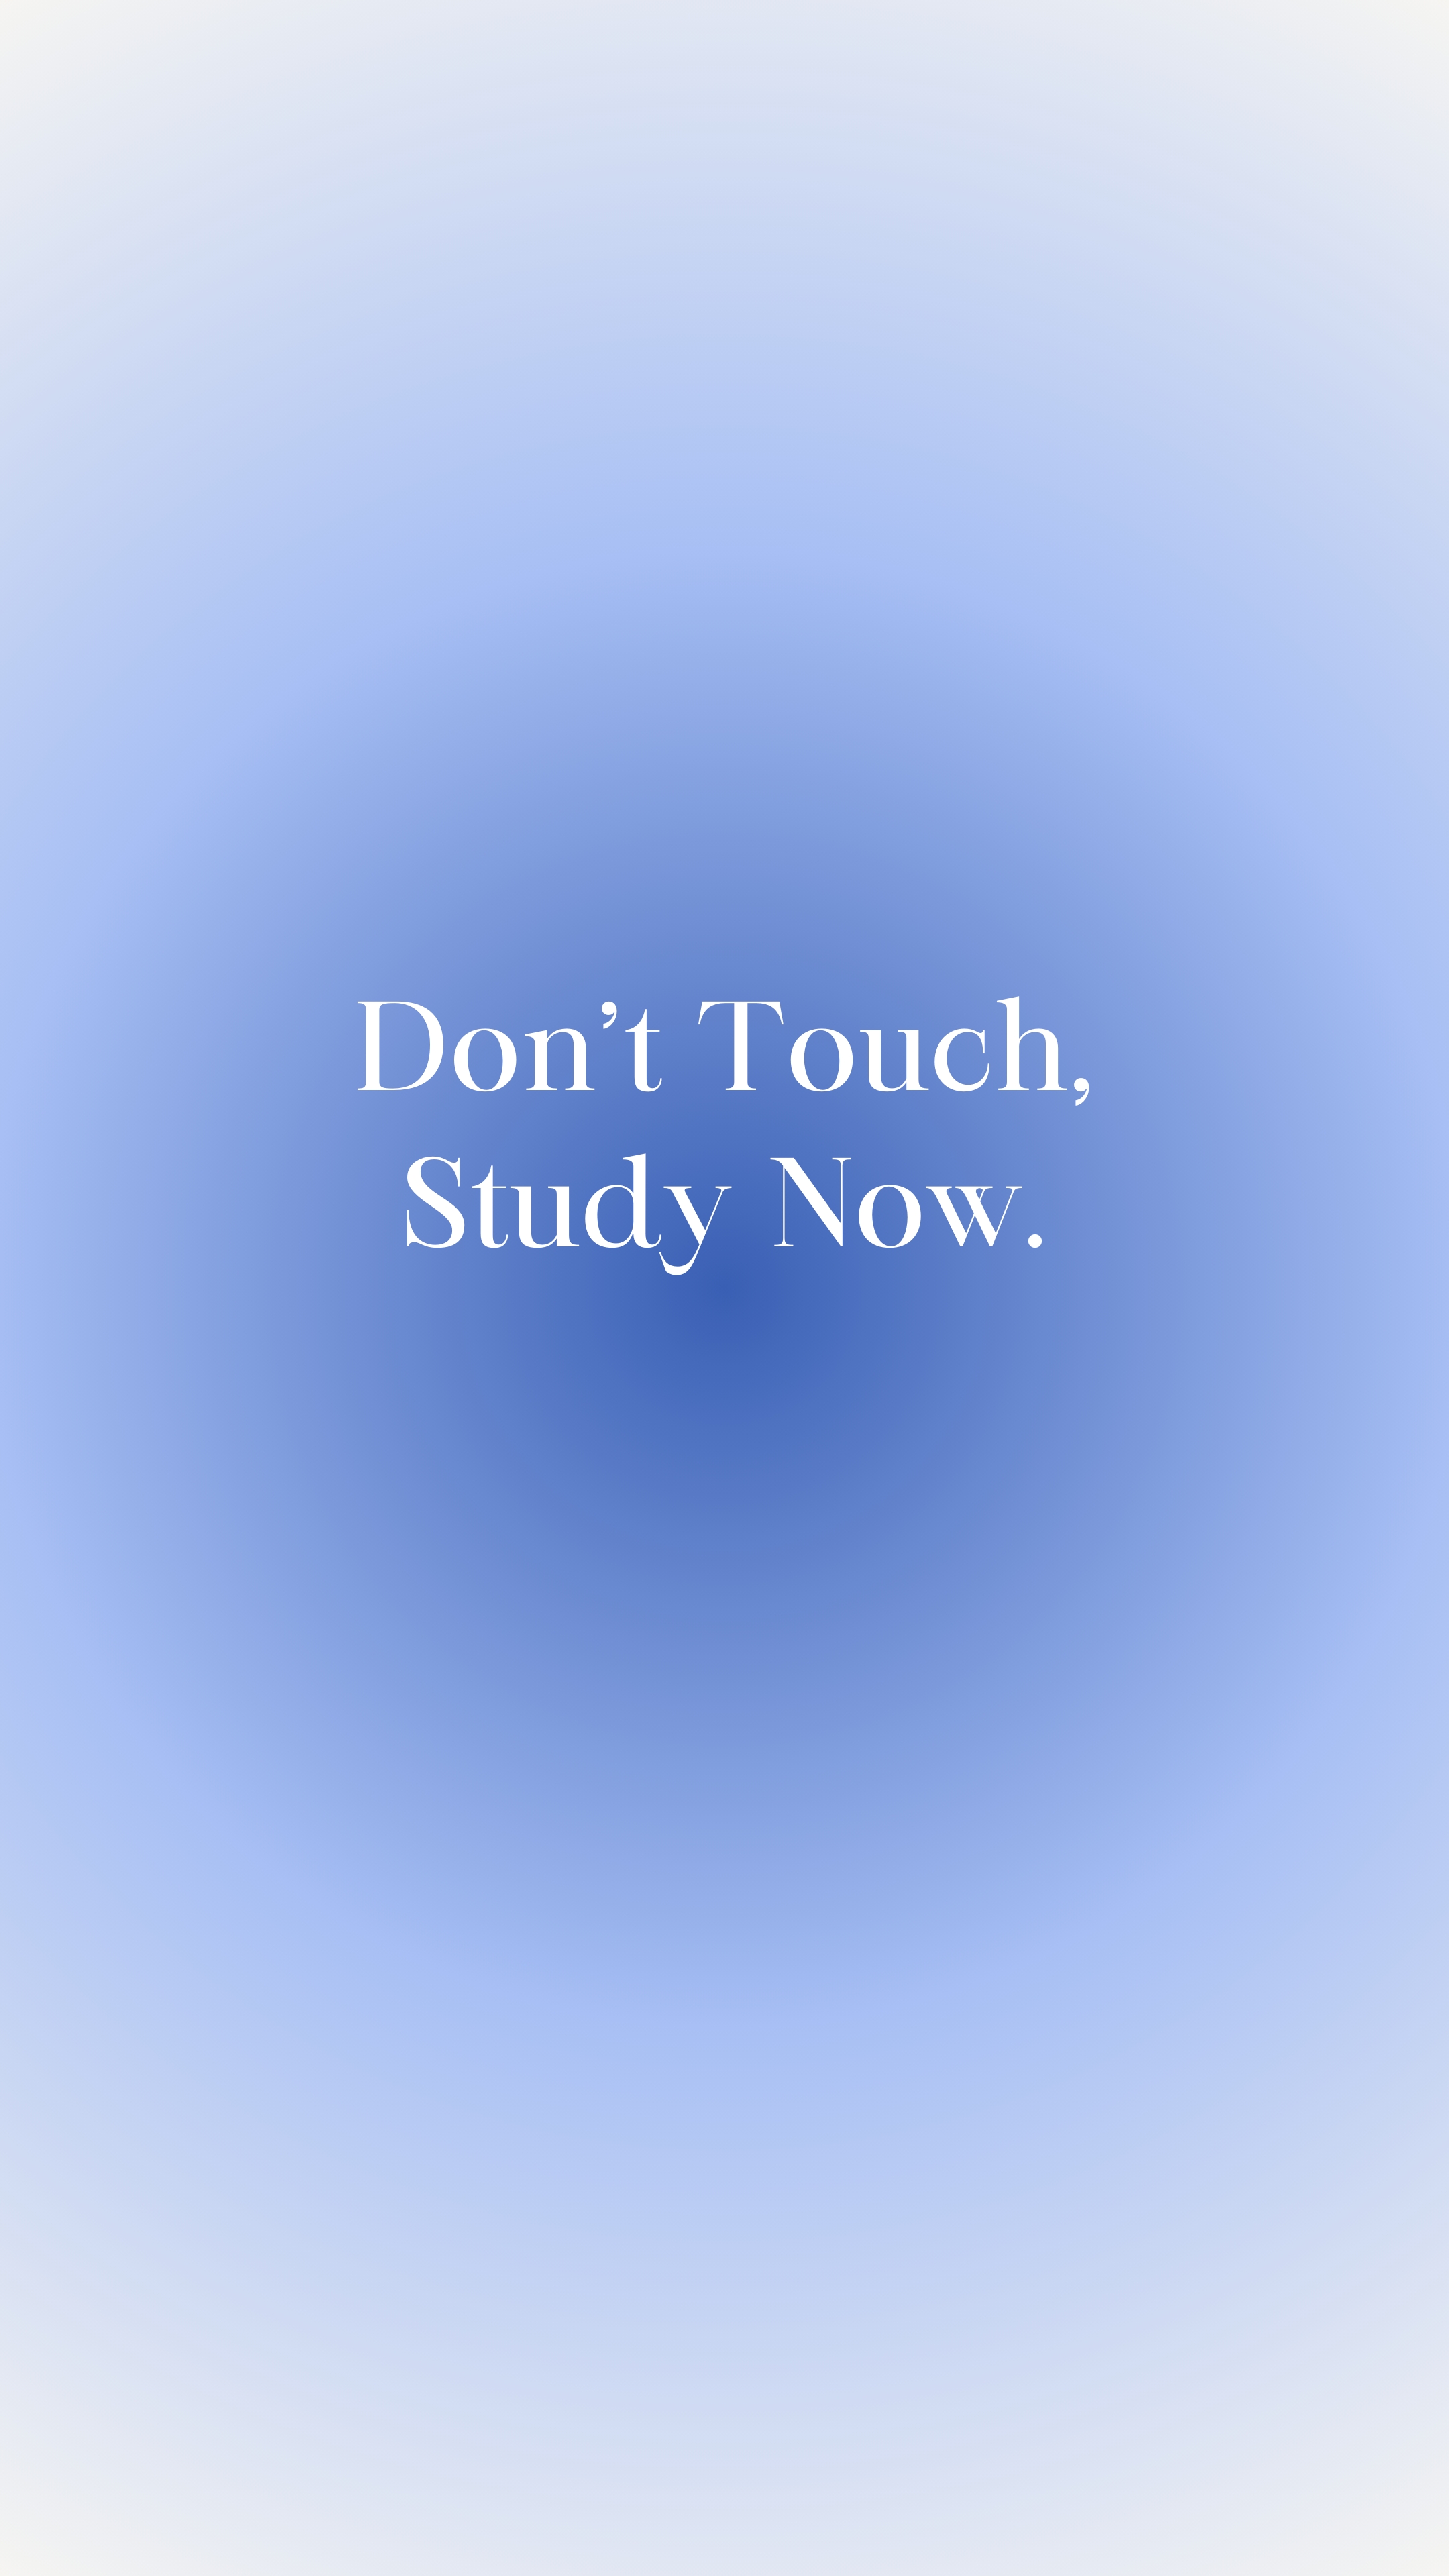 Don't Touch, Study Now Tapet[ef04016dba344bd28c07]